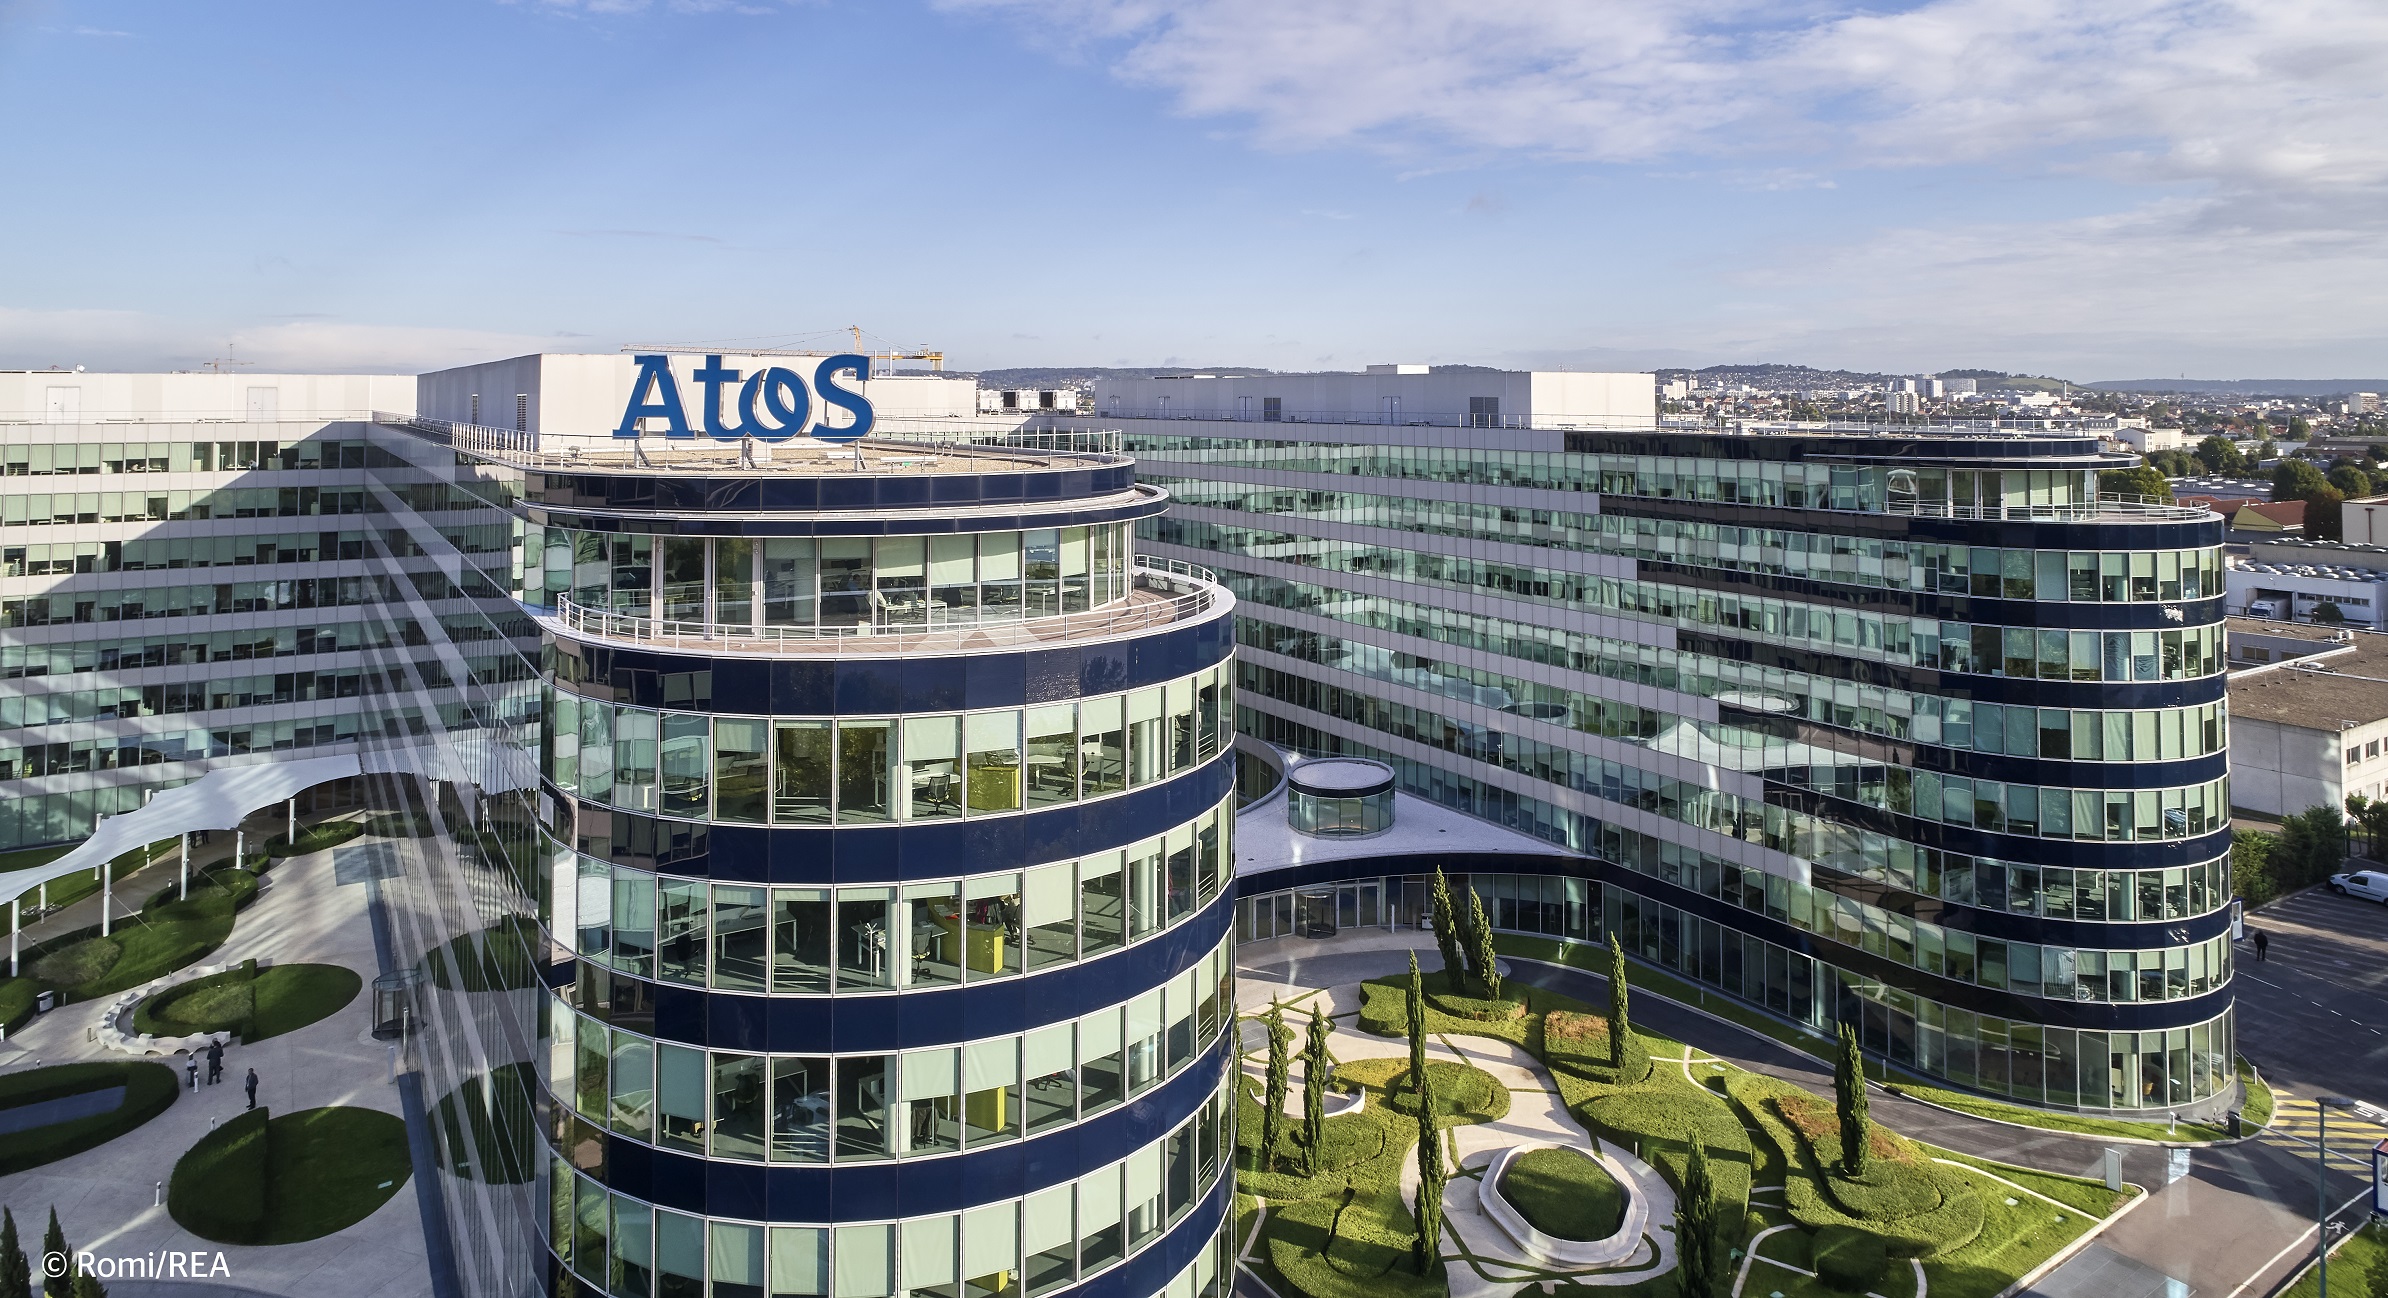 Atos Enhances Board Diversity and Expertise to Support Strategic Plan and Separation Project